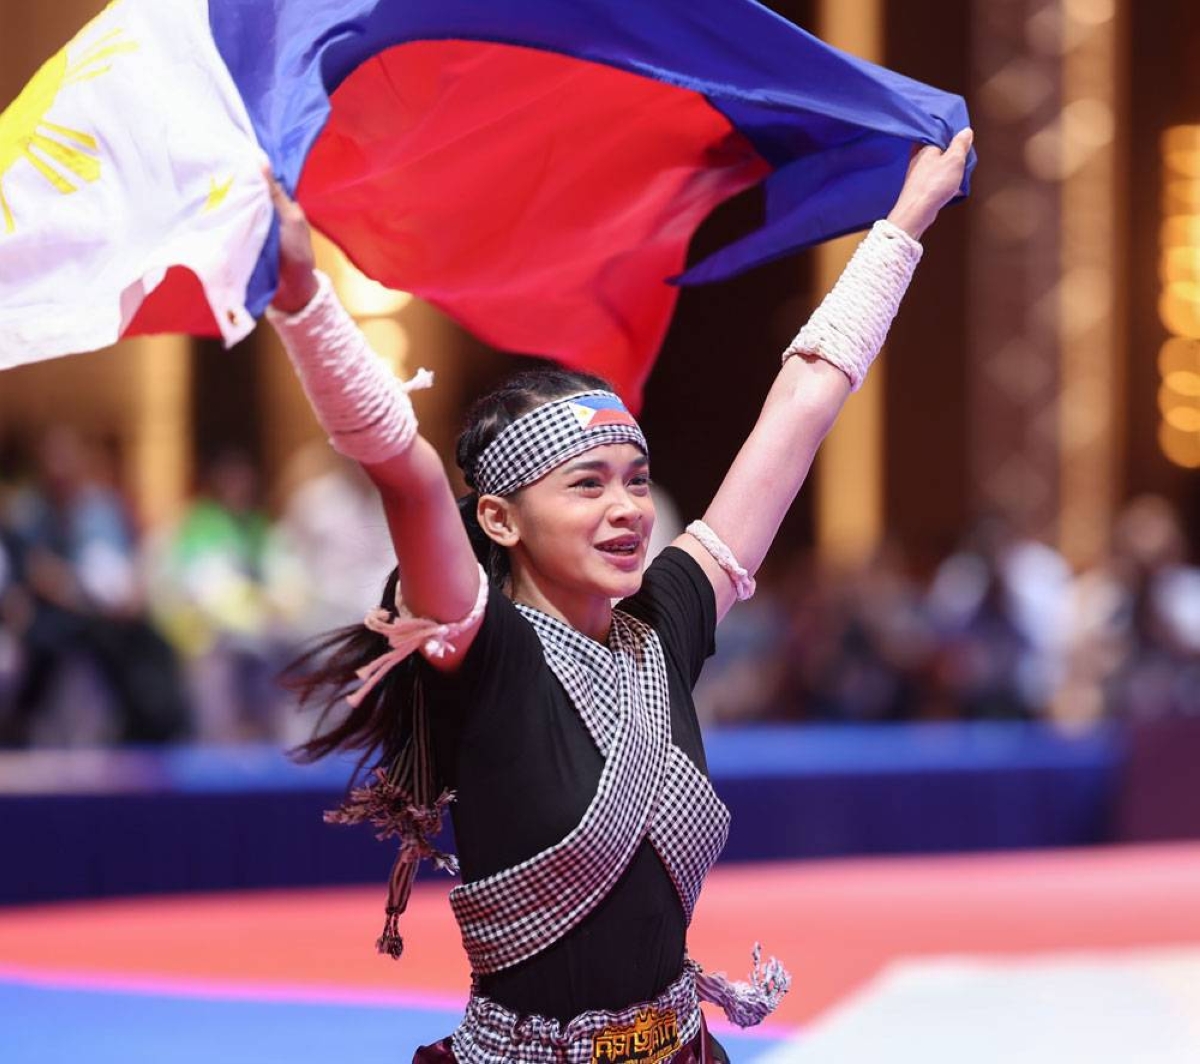 Angel Gwen Derla waves the Philippine flag after winning the gold medal in kun bokator, a traditional Cambodian sport, in the 32nd Southeast Asian Games on Thursday, May 4, here at the Chroy Changvar Convention Center Hall C. PHOTO BY RIO DELUVIO